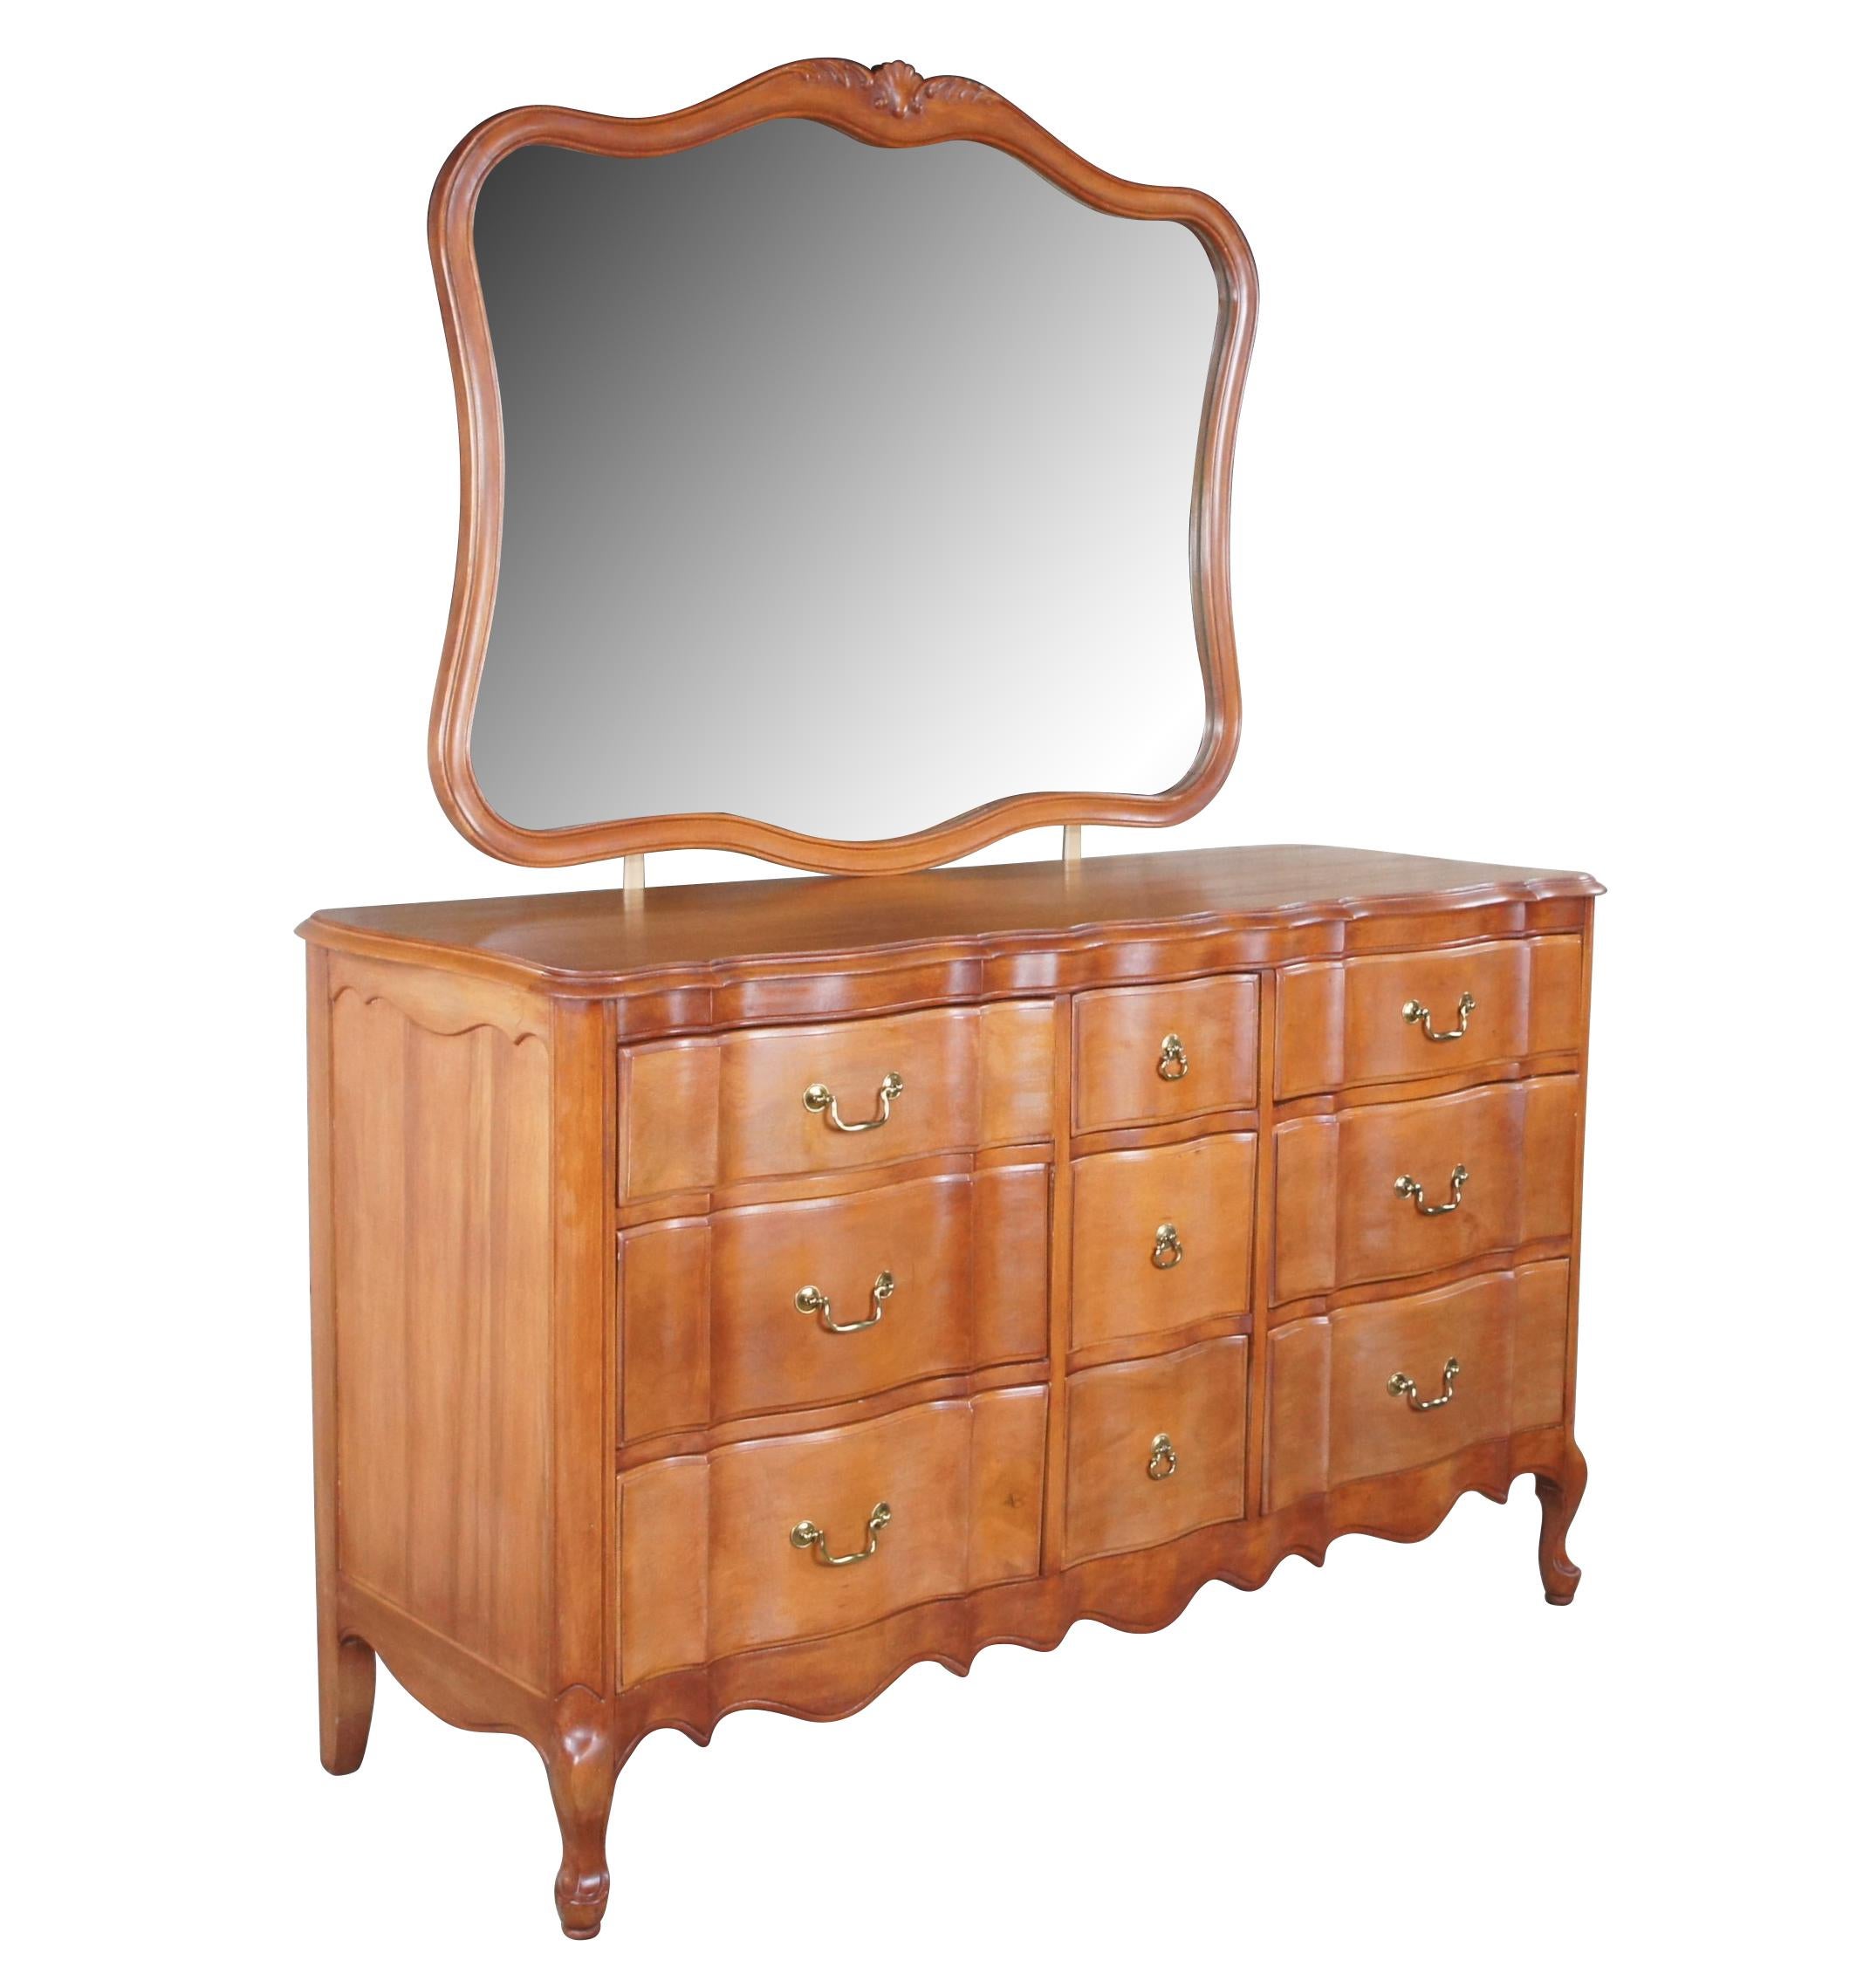 Mid century French Provincial dresser or chest of drawers with mirror.  Made of mahogany featuring serpentine form with nine drawers, brass hardware, cabriole legs and  shell accent mirror .

Dimensions: 
58